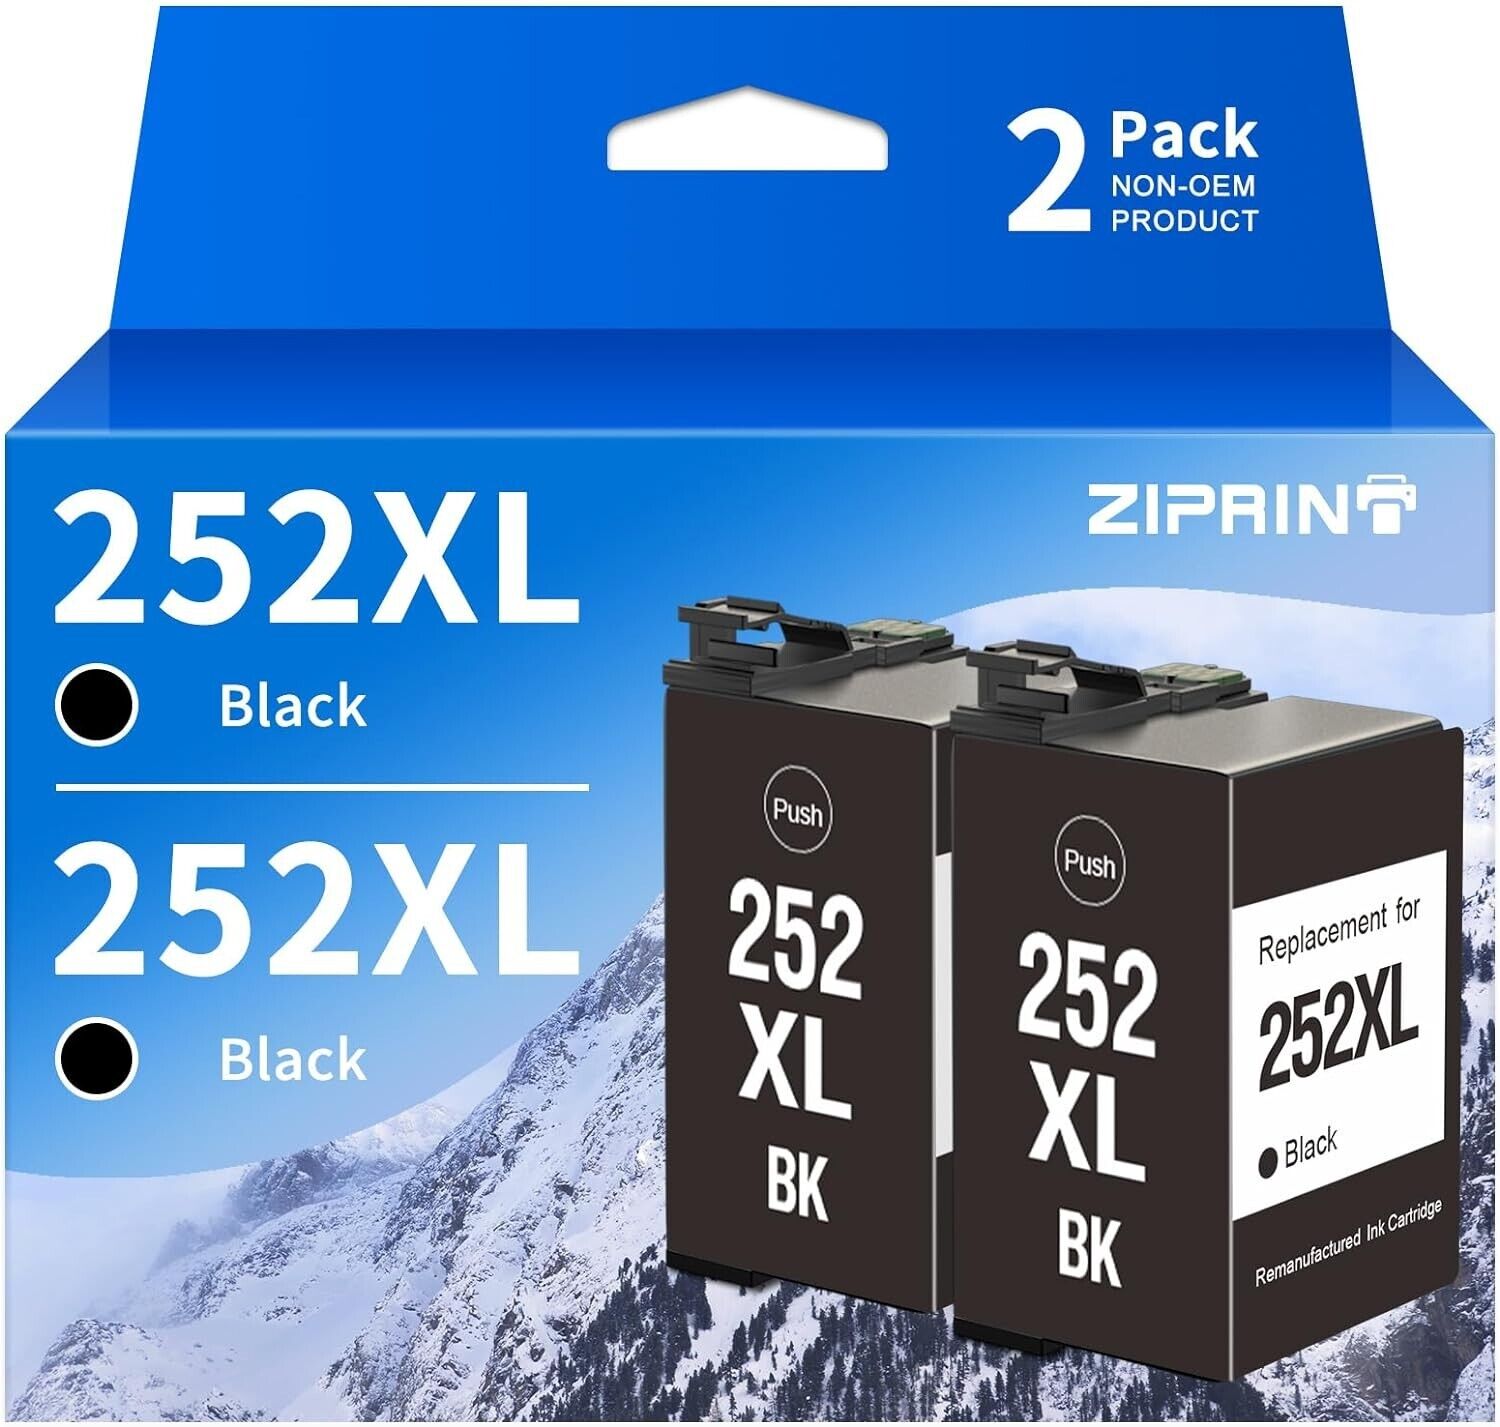 Ink Cartridge Replacement for Epson 252XL WF-7620 WF-7210 - 2 black